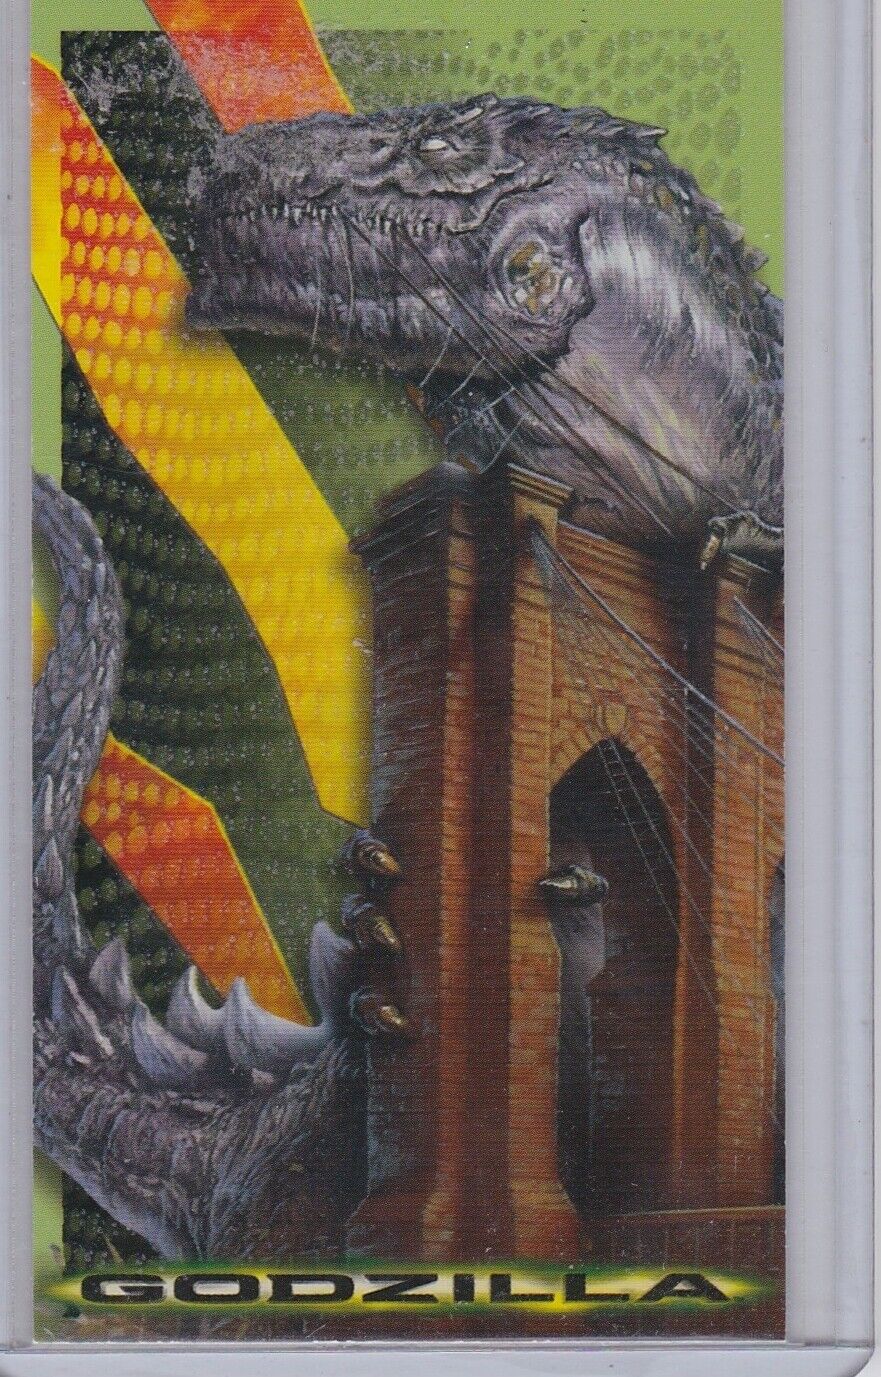 1998 GODZILLA MOTHER OF ALL MONSTERS EMBOSSED GS-1 CHASE CARD